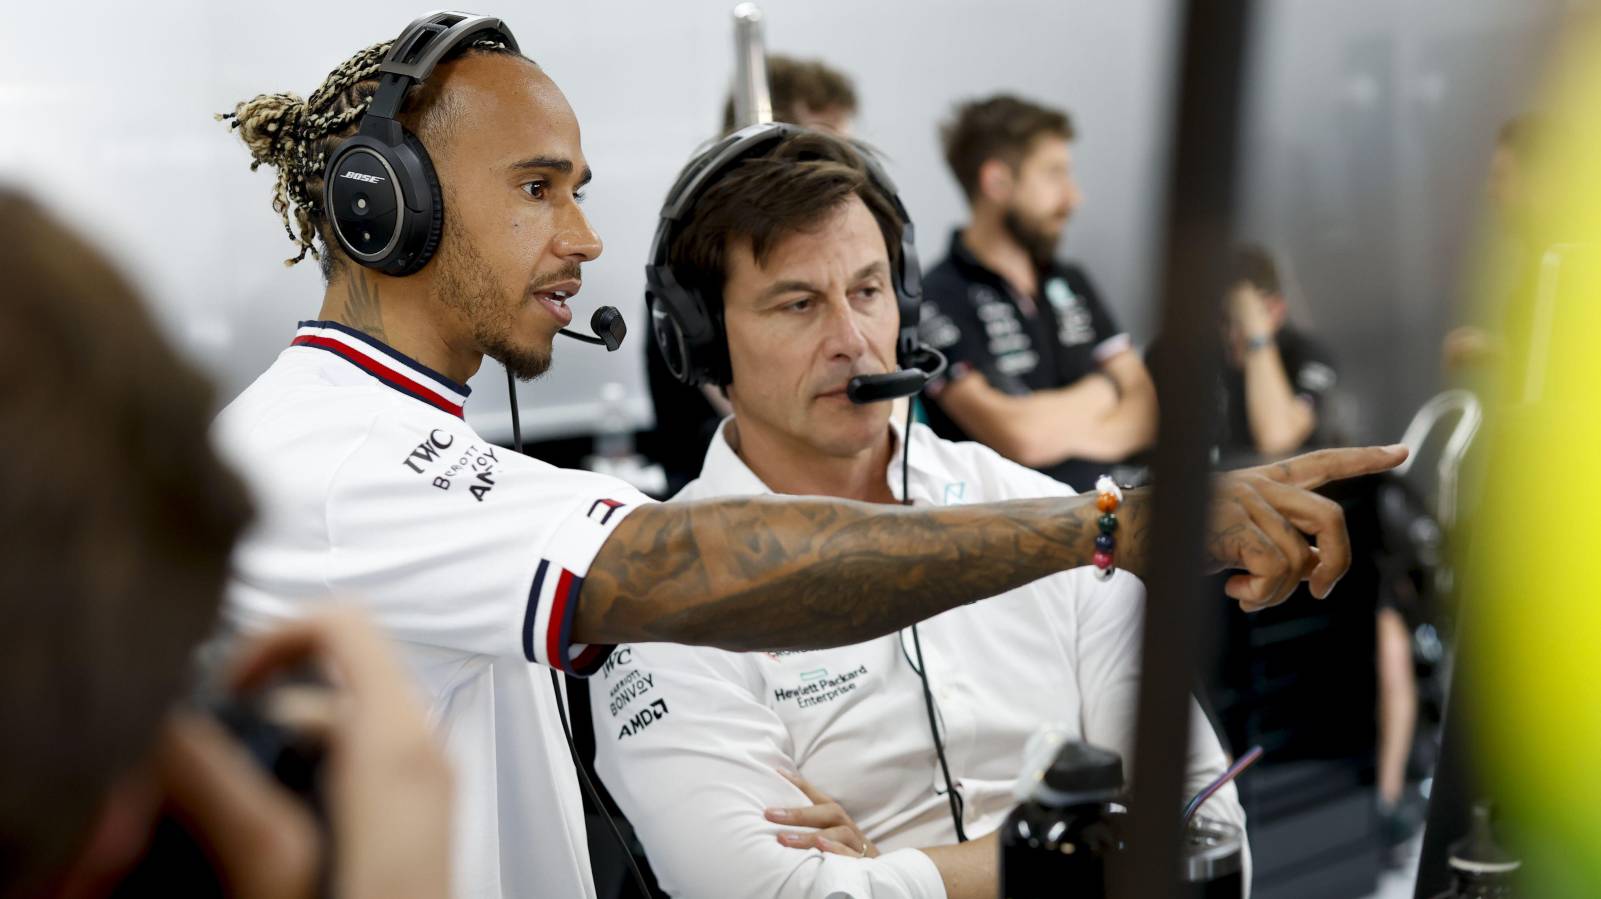 Lewis Hamilton pointing next to Toto Wolff. Paul Ricard July 2022.